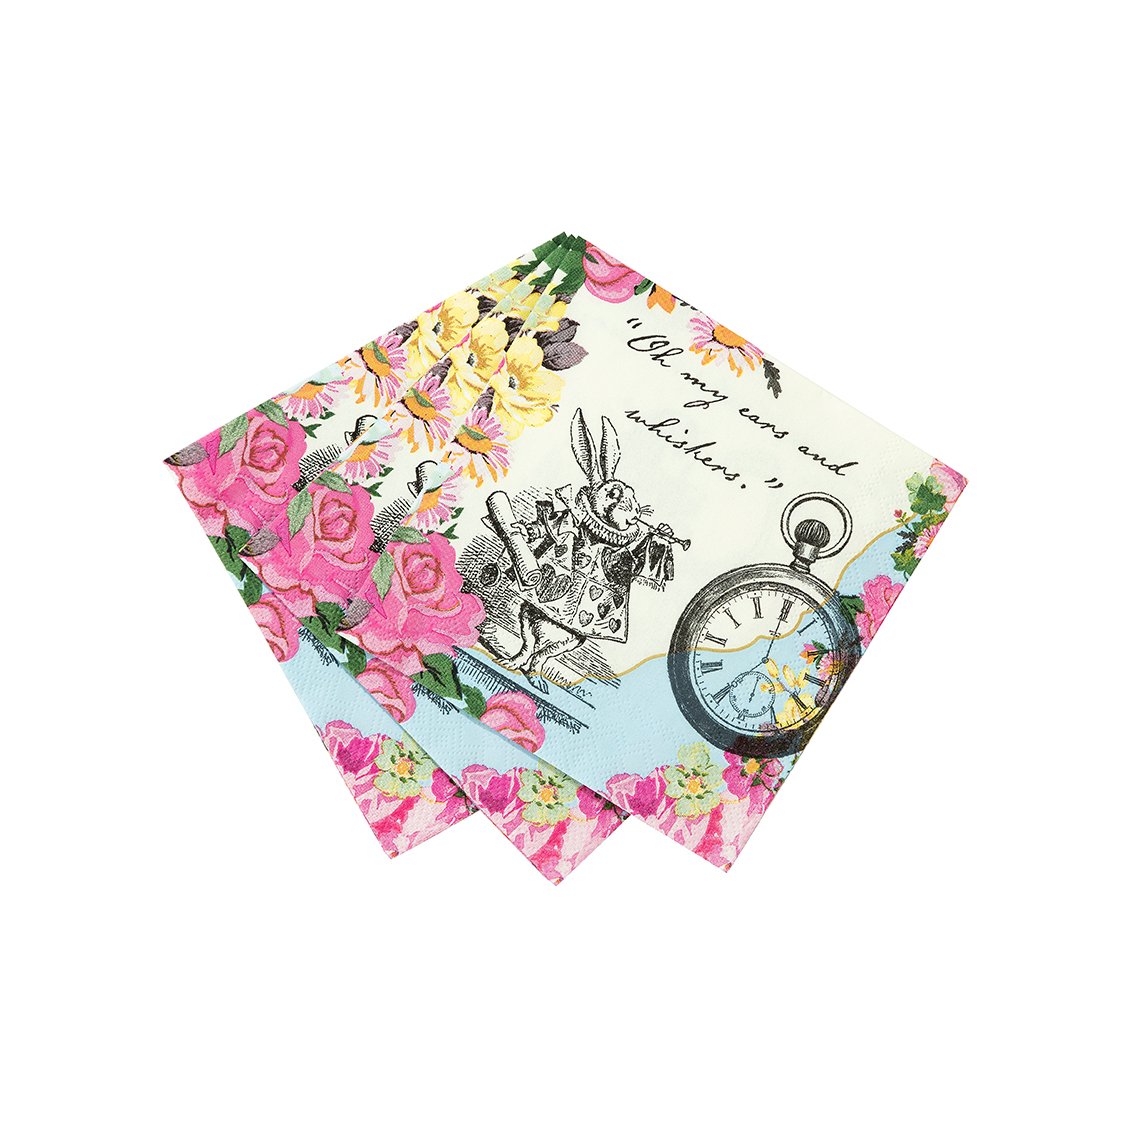 Truly Alice Cocktail Napkins pack